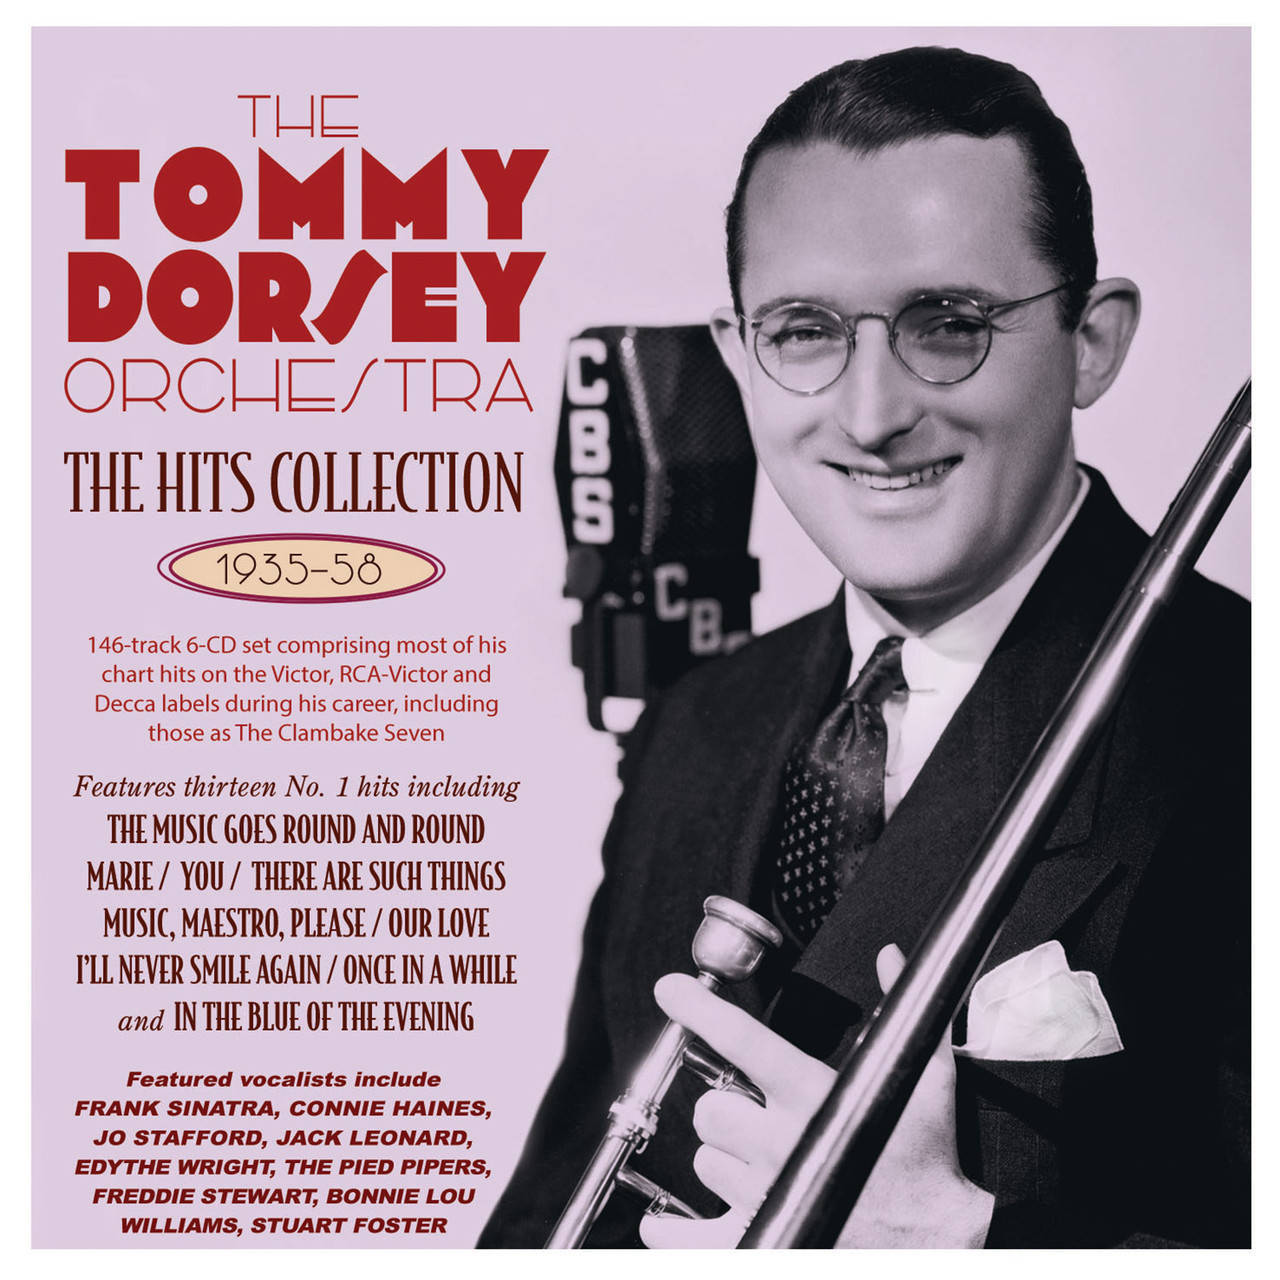 Tommy Dorsey And His Orchestra Collection Cover Art Wallpaper